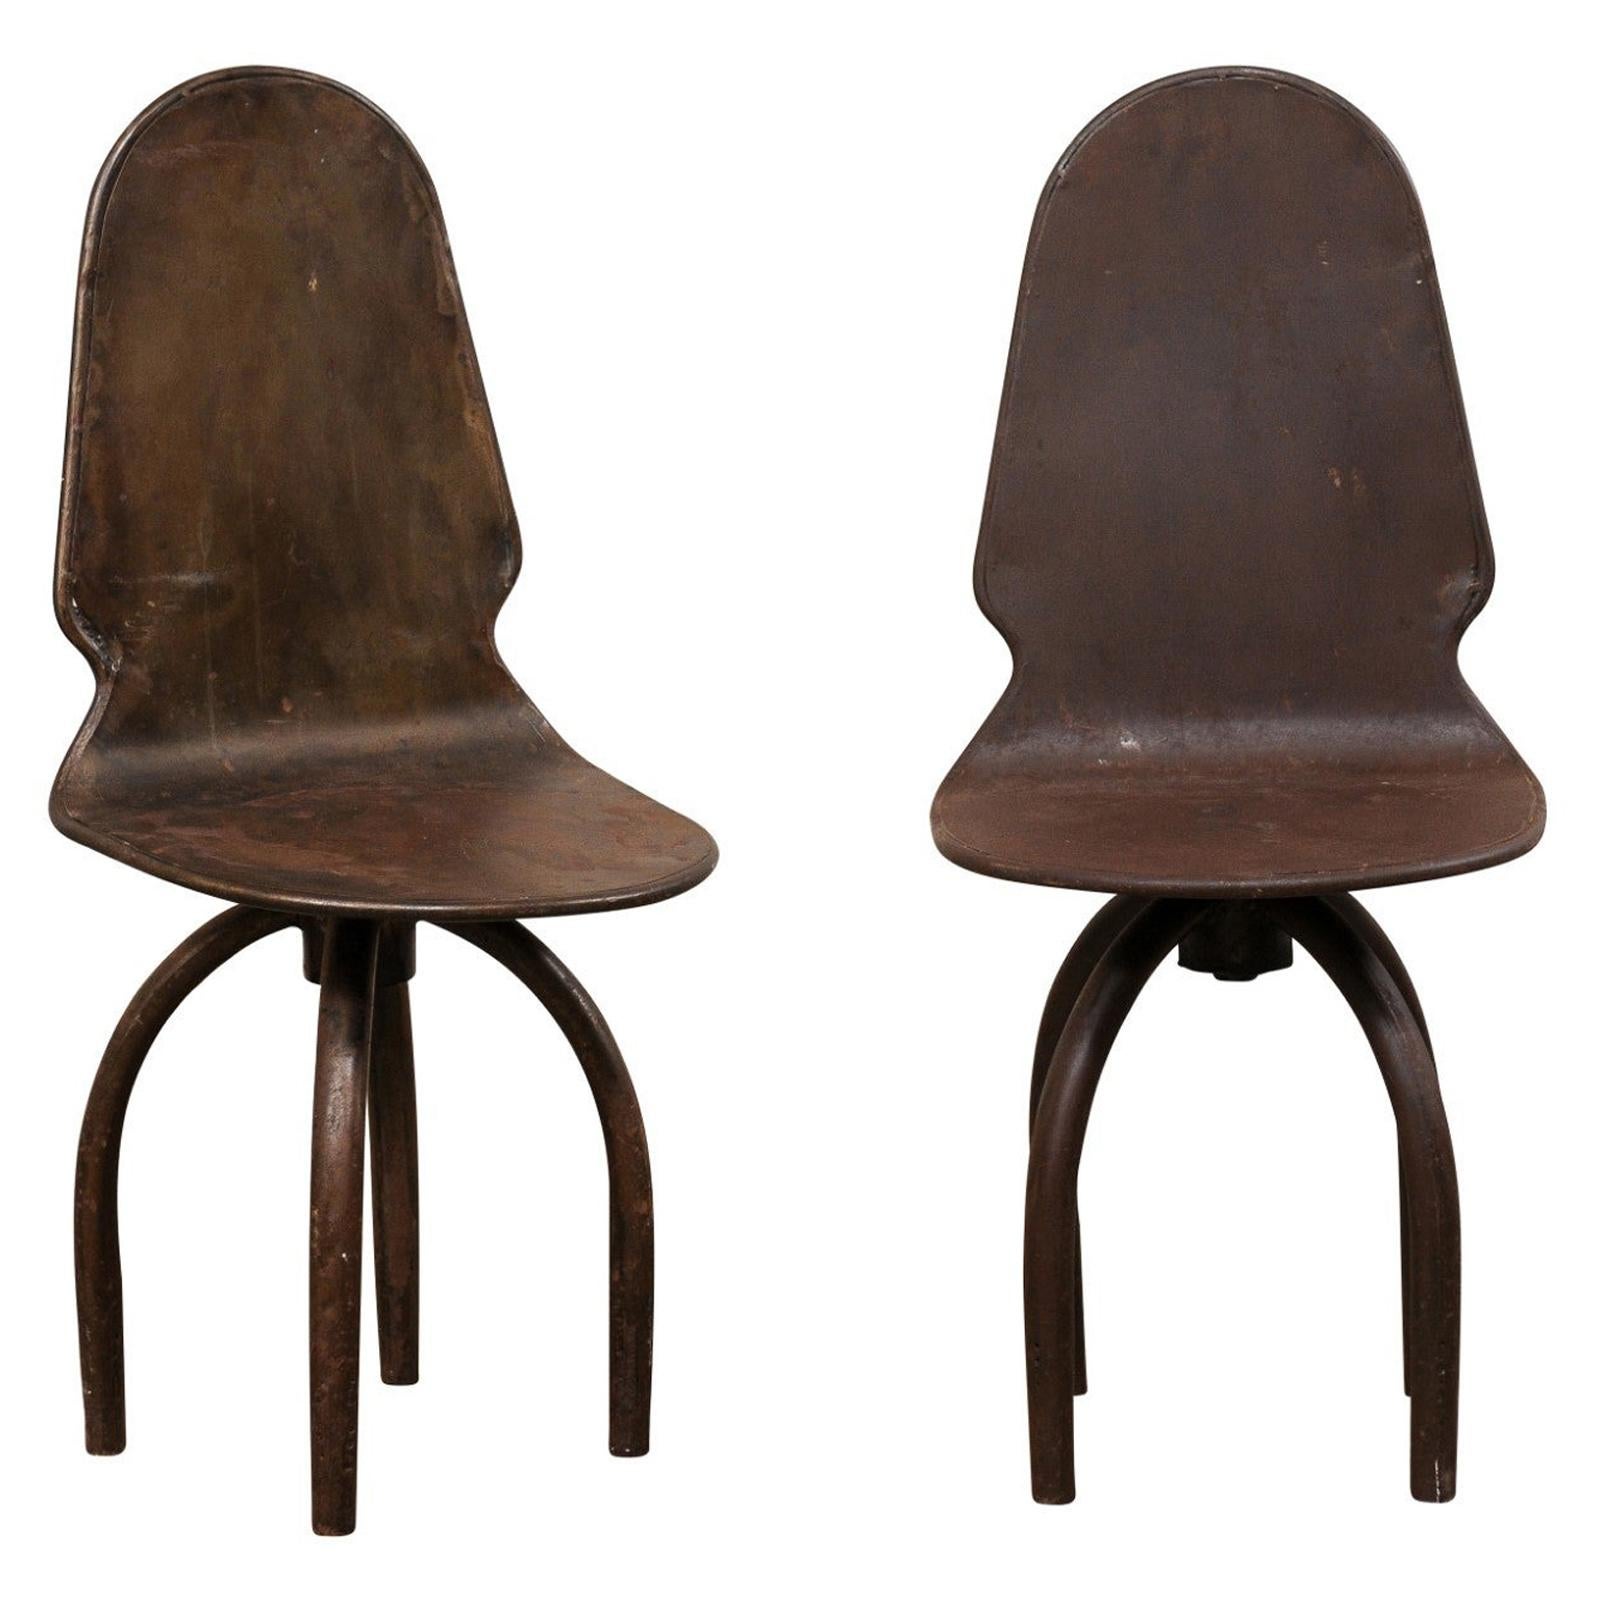 Spanish Pair of Iron Swivel Chairs on Spider-Style Legs, Industrial-Chic For Sale